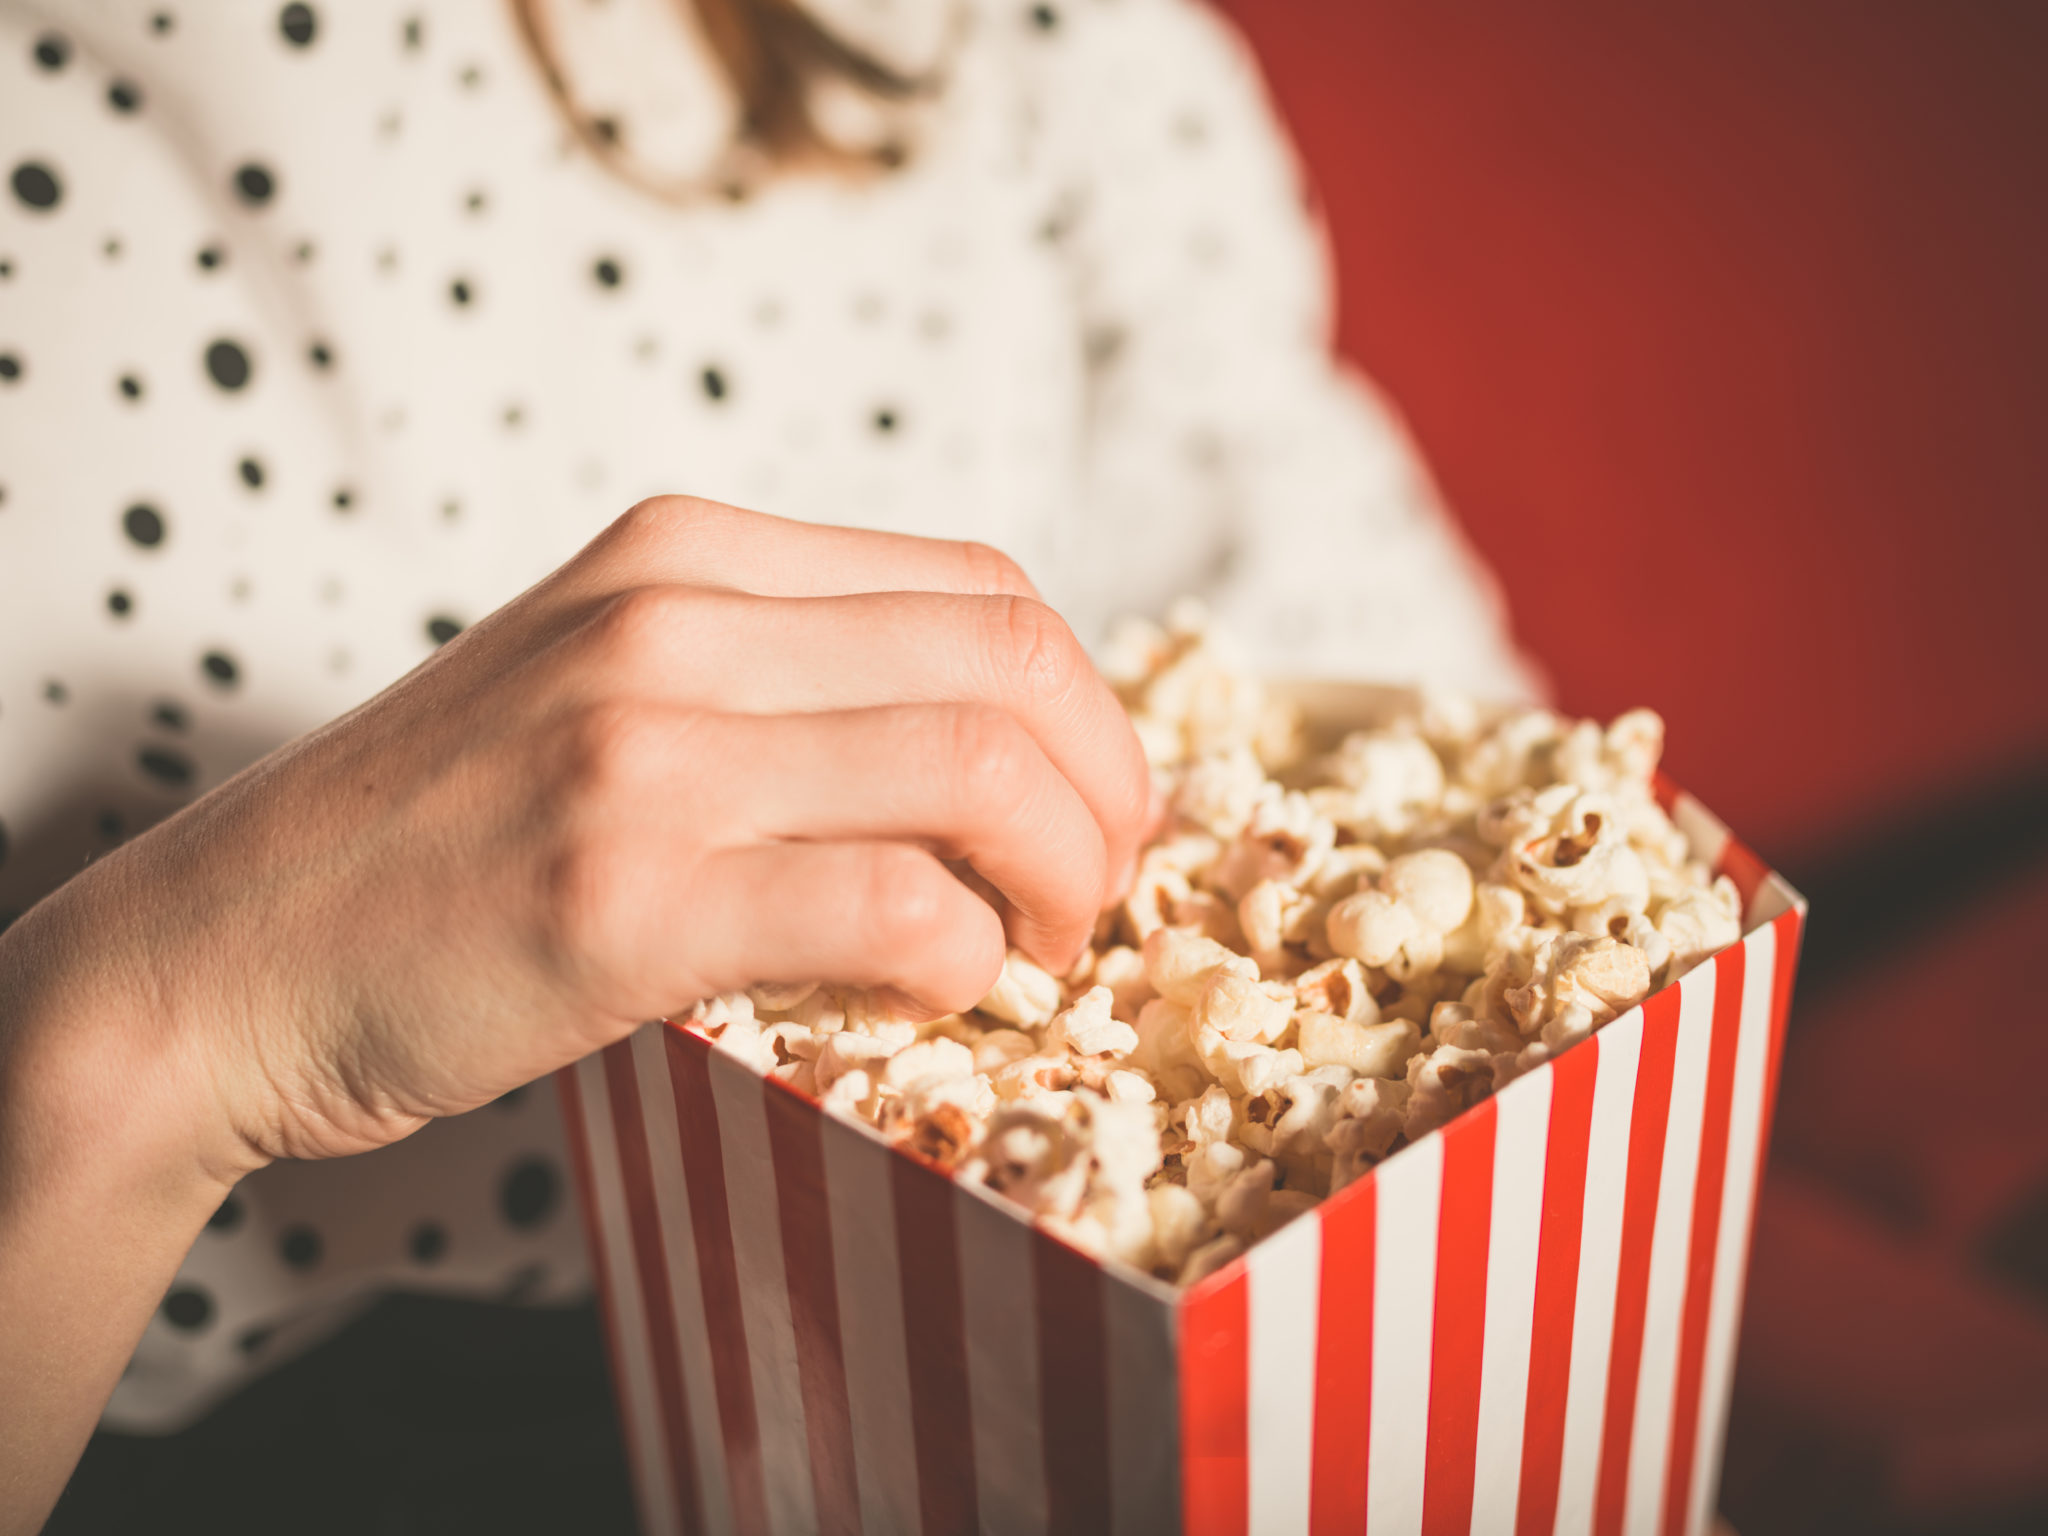 Study: 25% of US Broadband Households Prefer Home-Viewing to Theaters